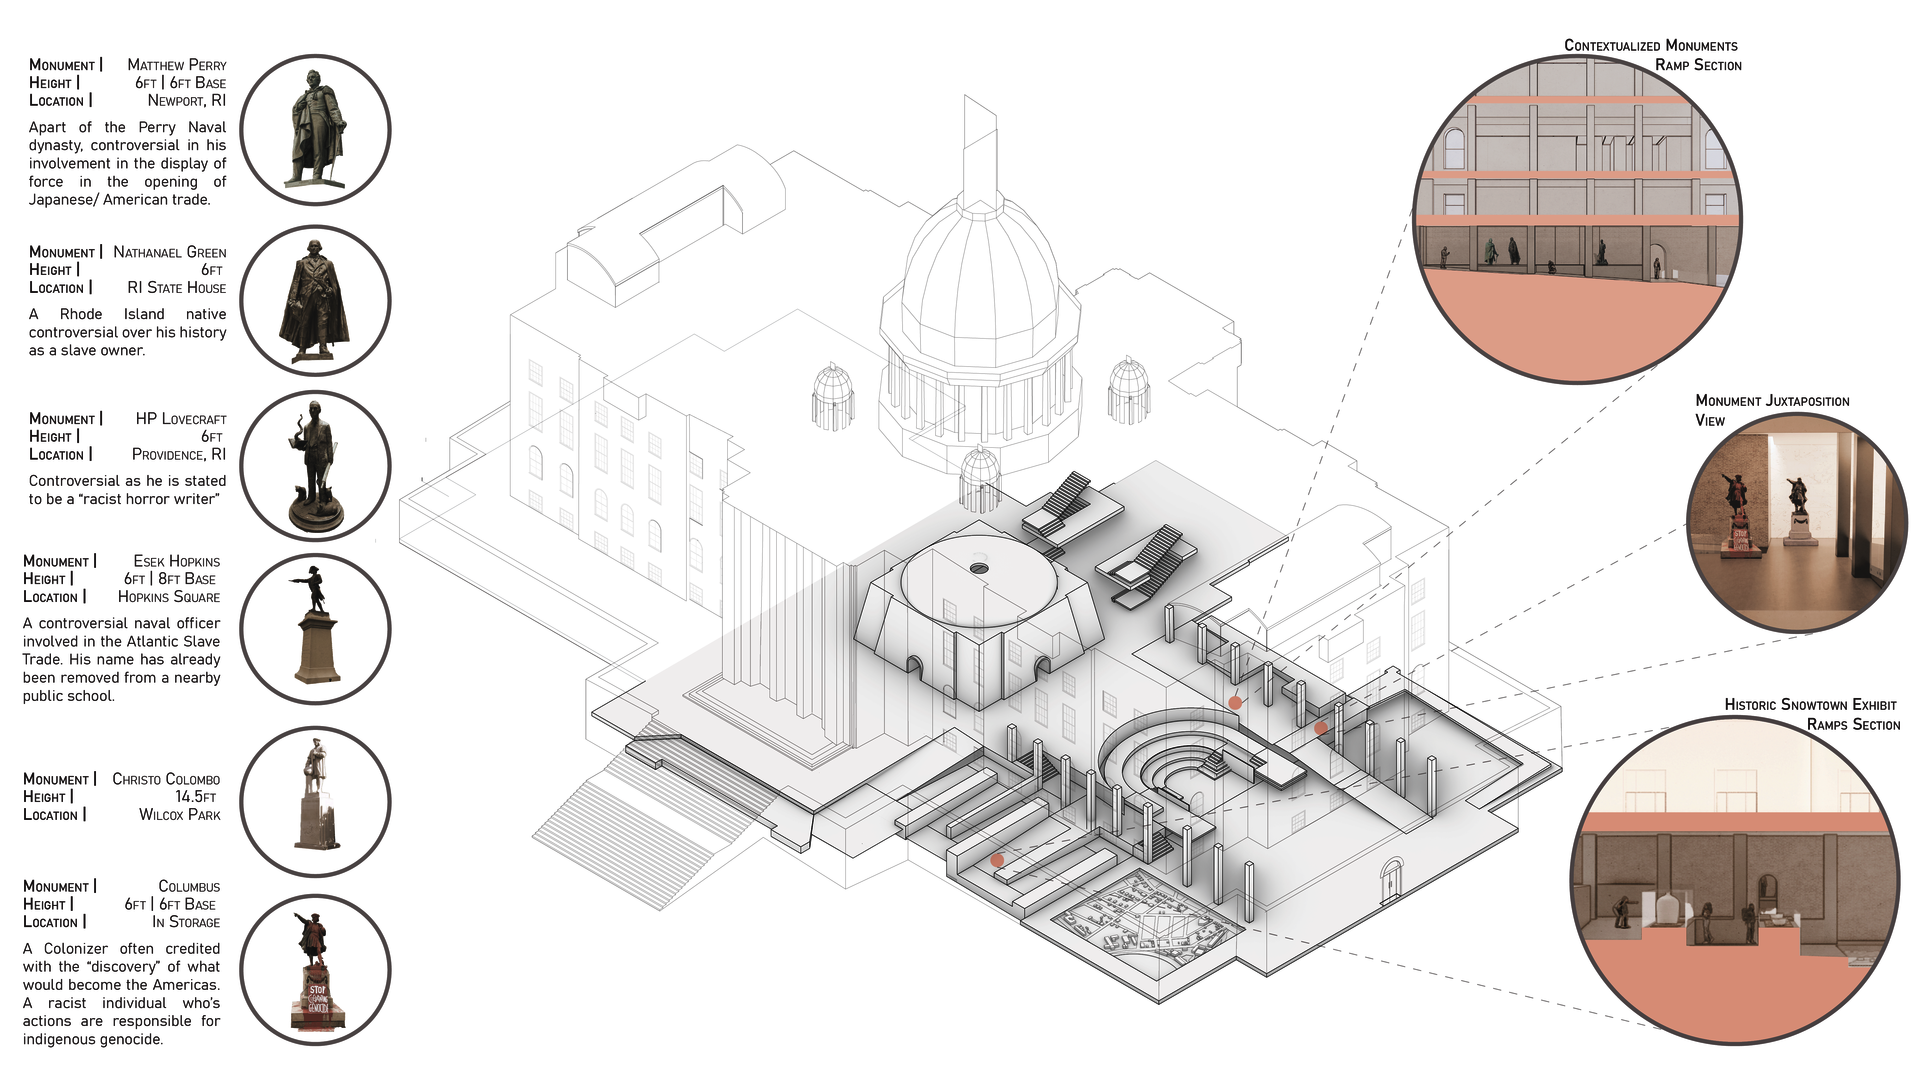 An axonometric demonstrating the exhibition spaces proposed within the sub-level of the Rhode Island State House. The axon includes ramps, details of the two major exhibit spaces, as well as the inventory of contentious monuments.